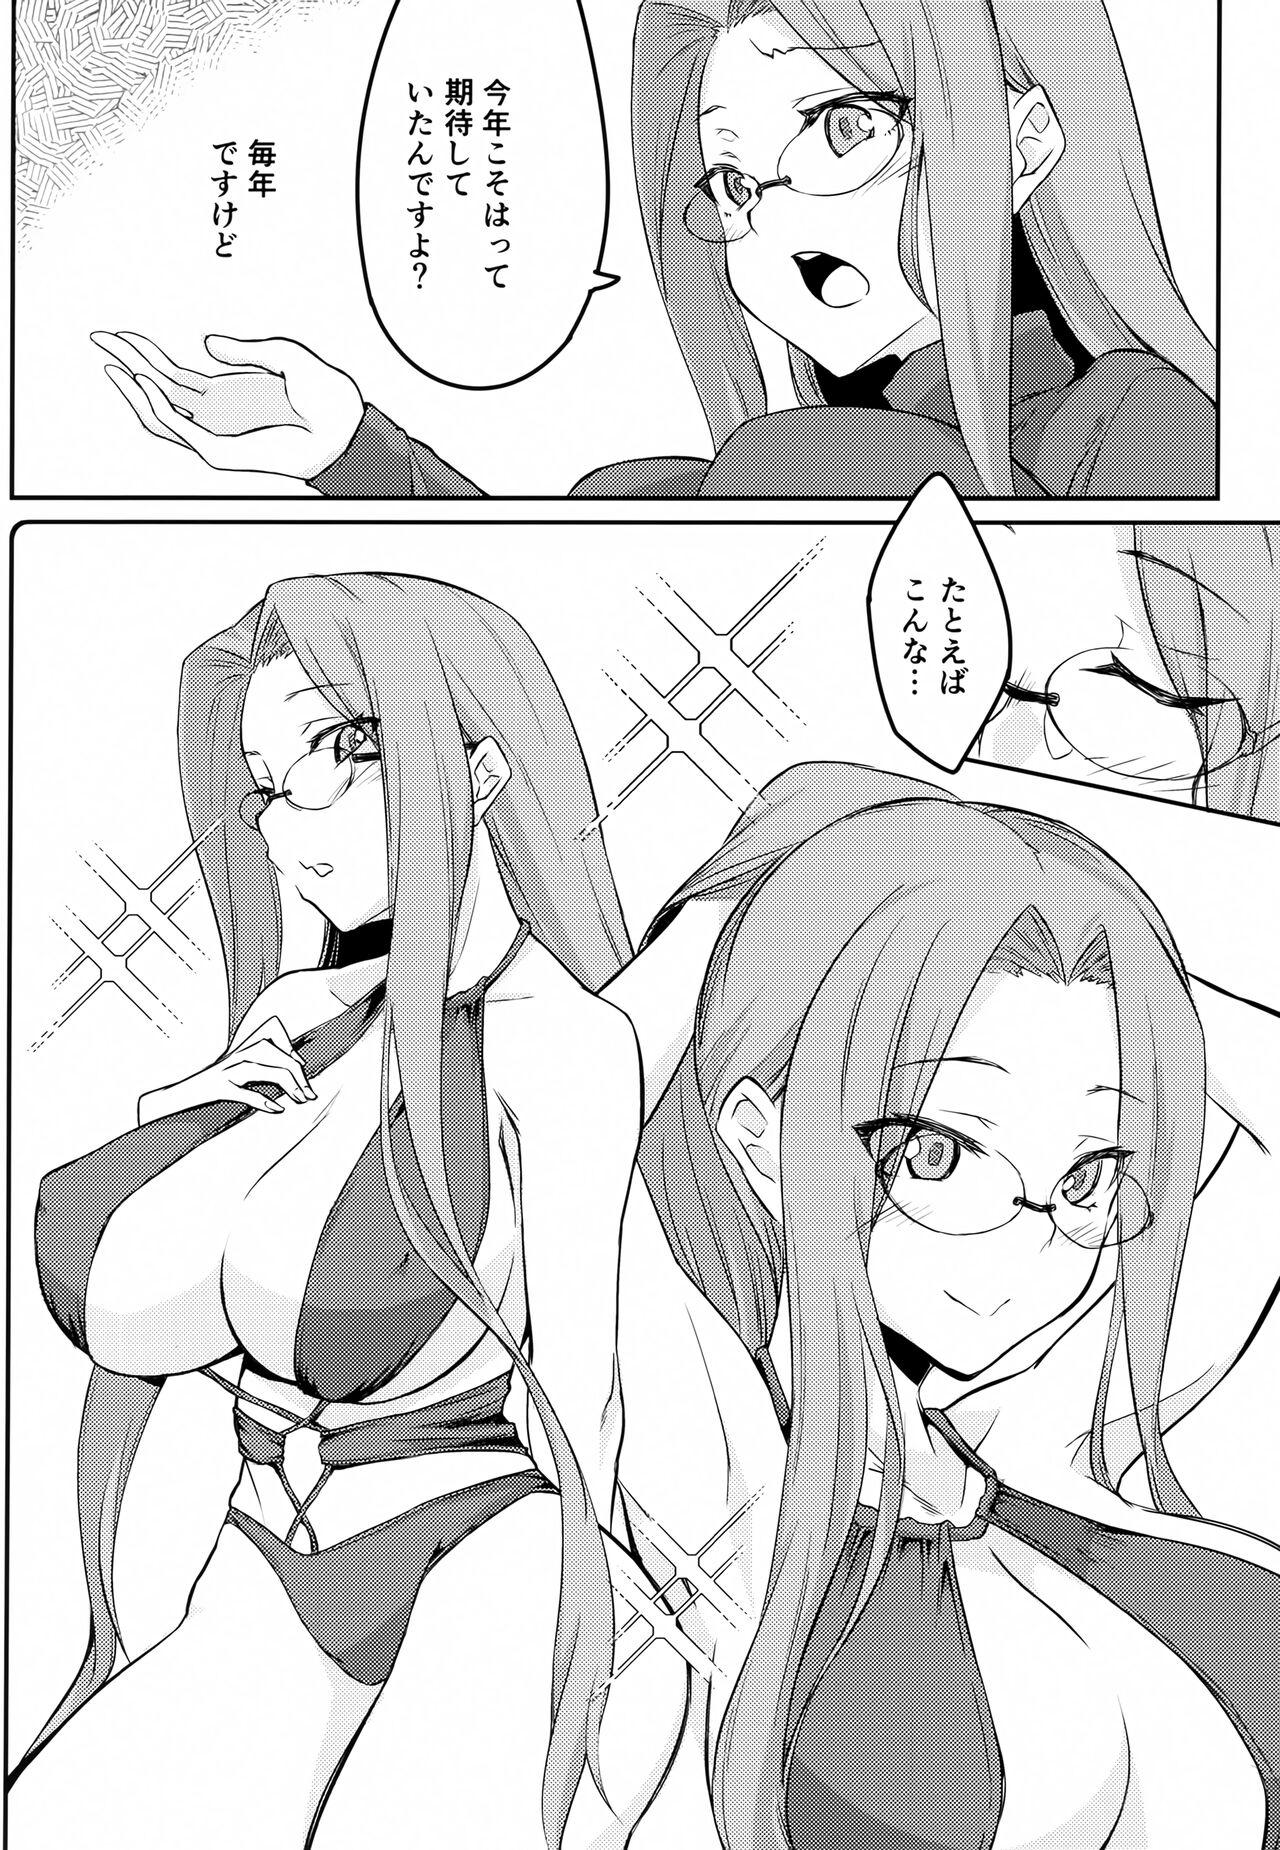 Female R15 - Fate stay night Asia - Page 5